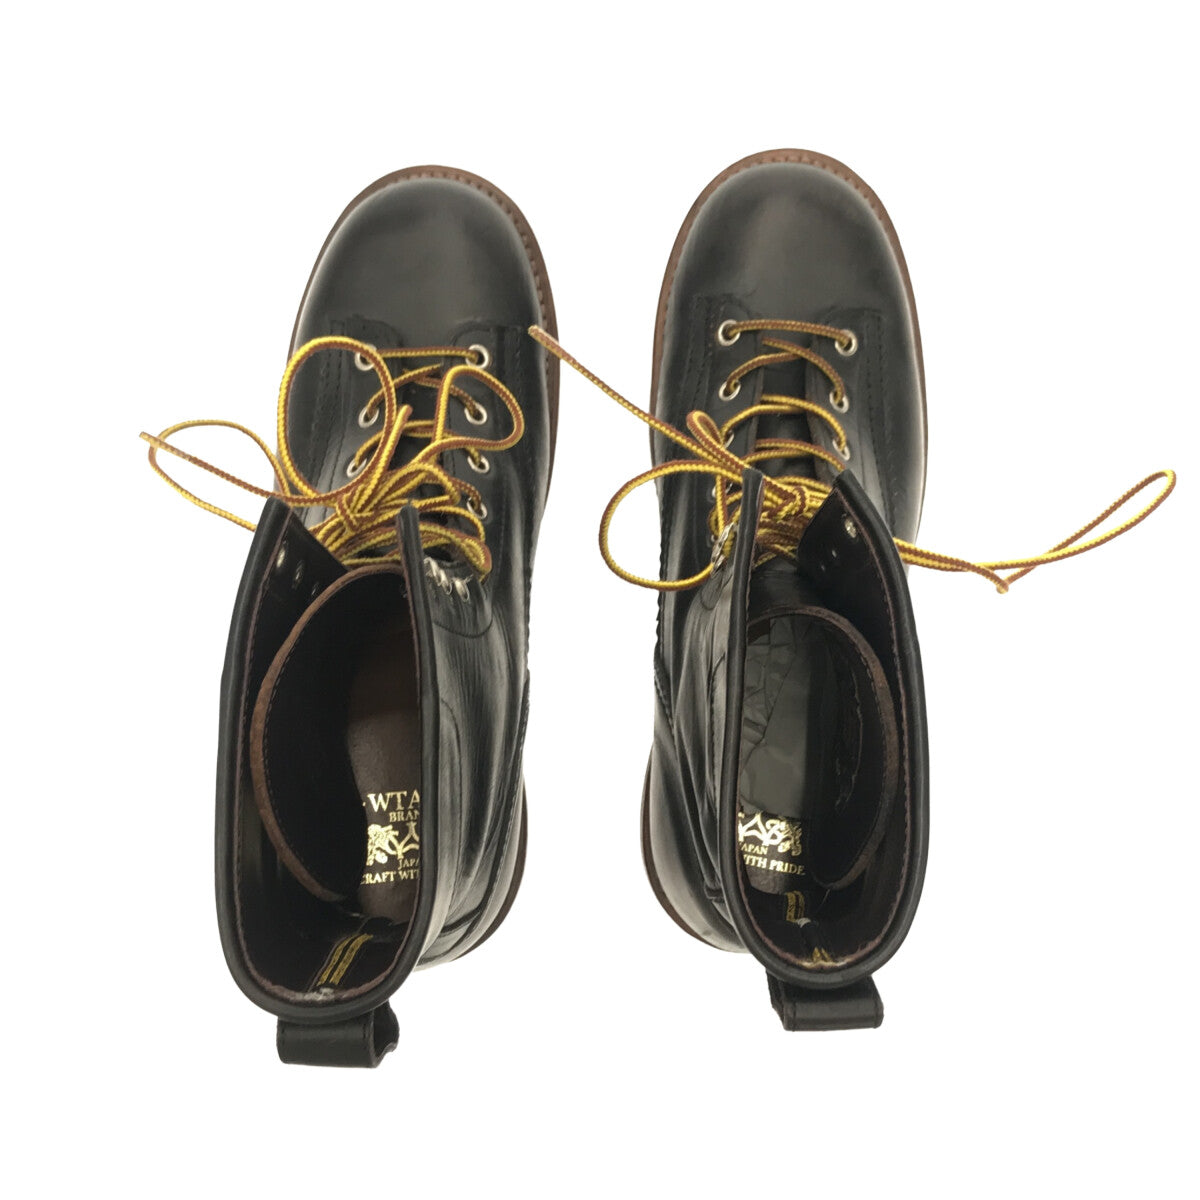 【H】WTAPS 09AW BEETLE BOOTS 27cm